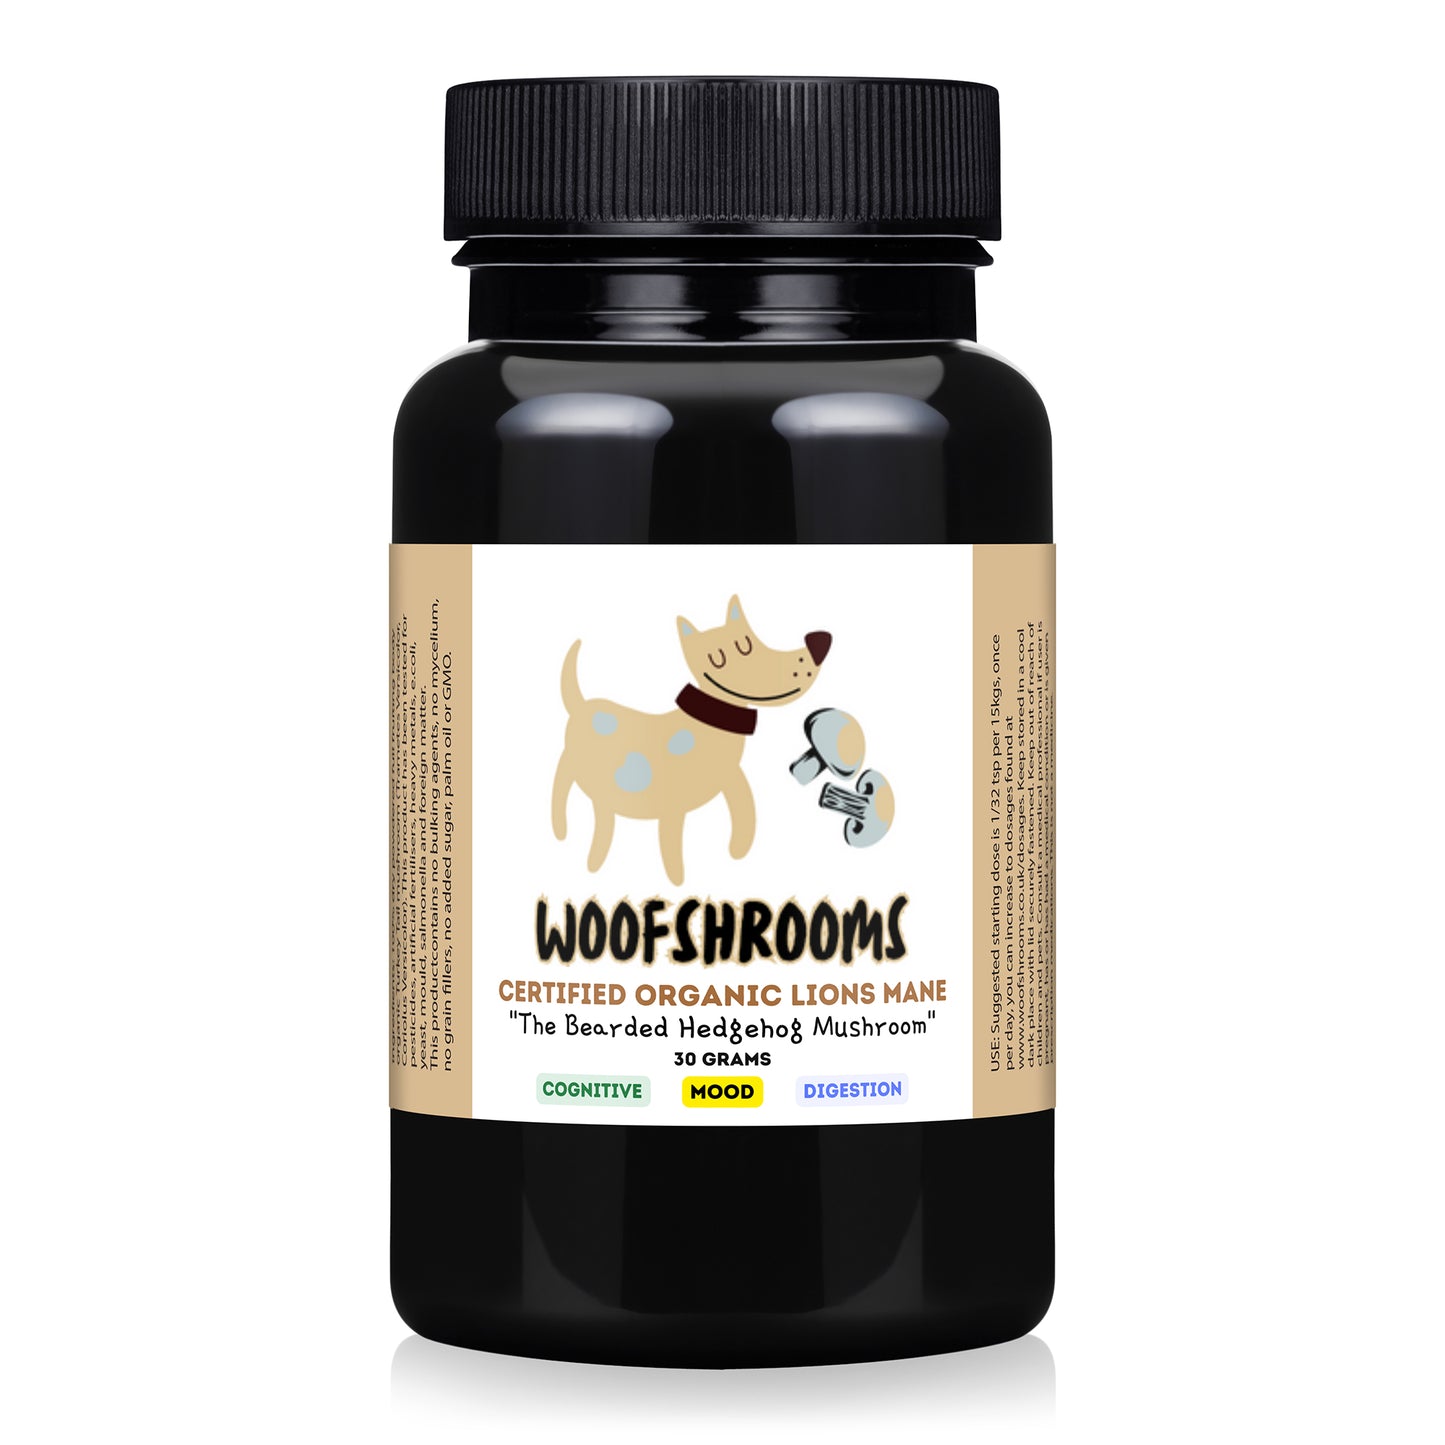 A Lion's Mane mushroom supplement offering health benefits for dogs.